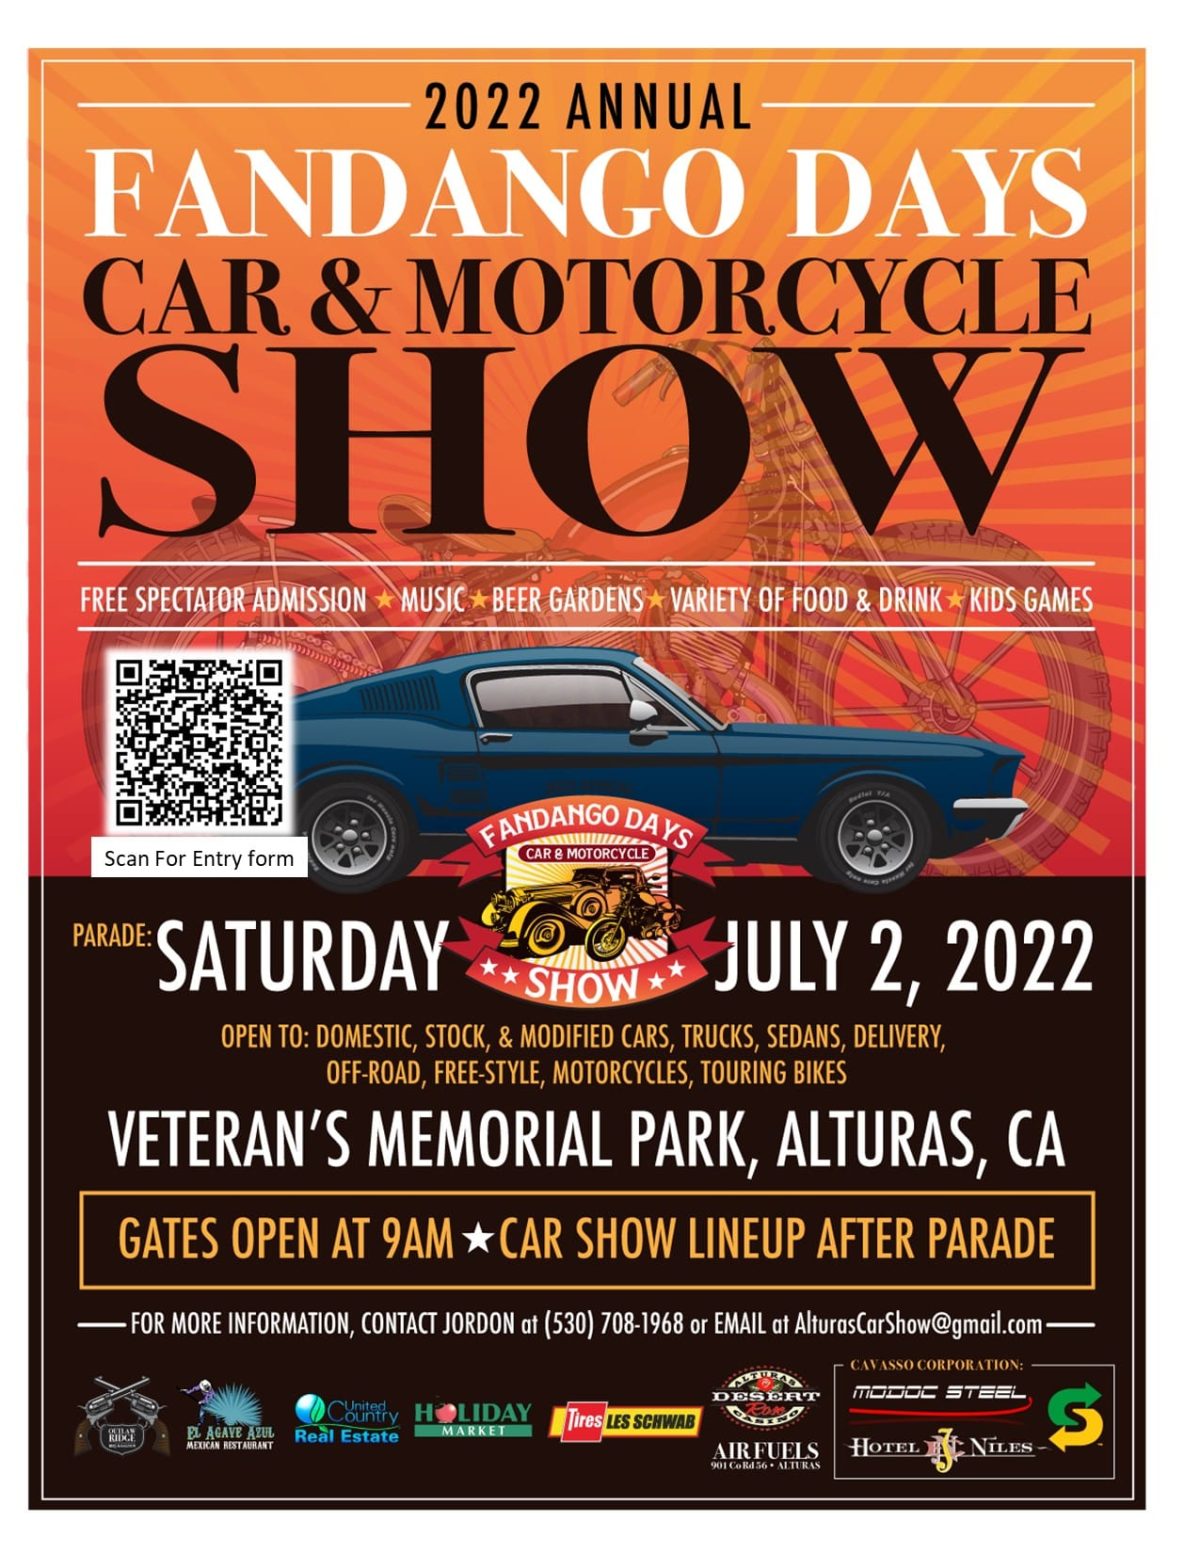 Fandango Days Car and Motorcycle Show